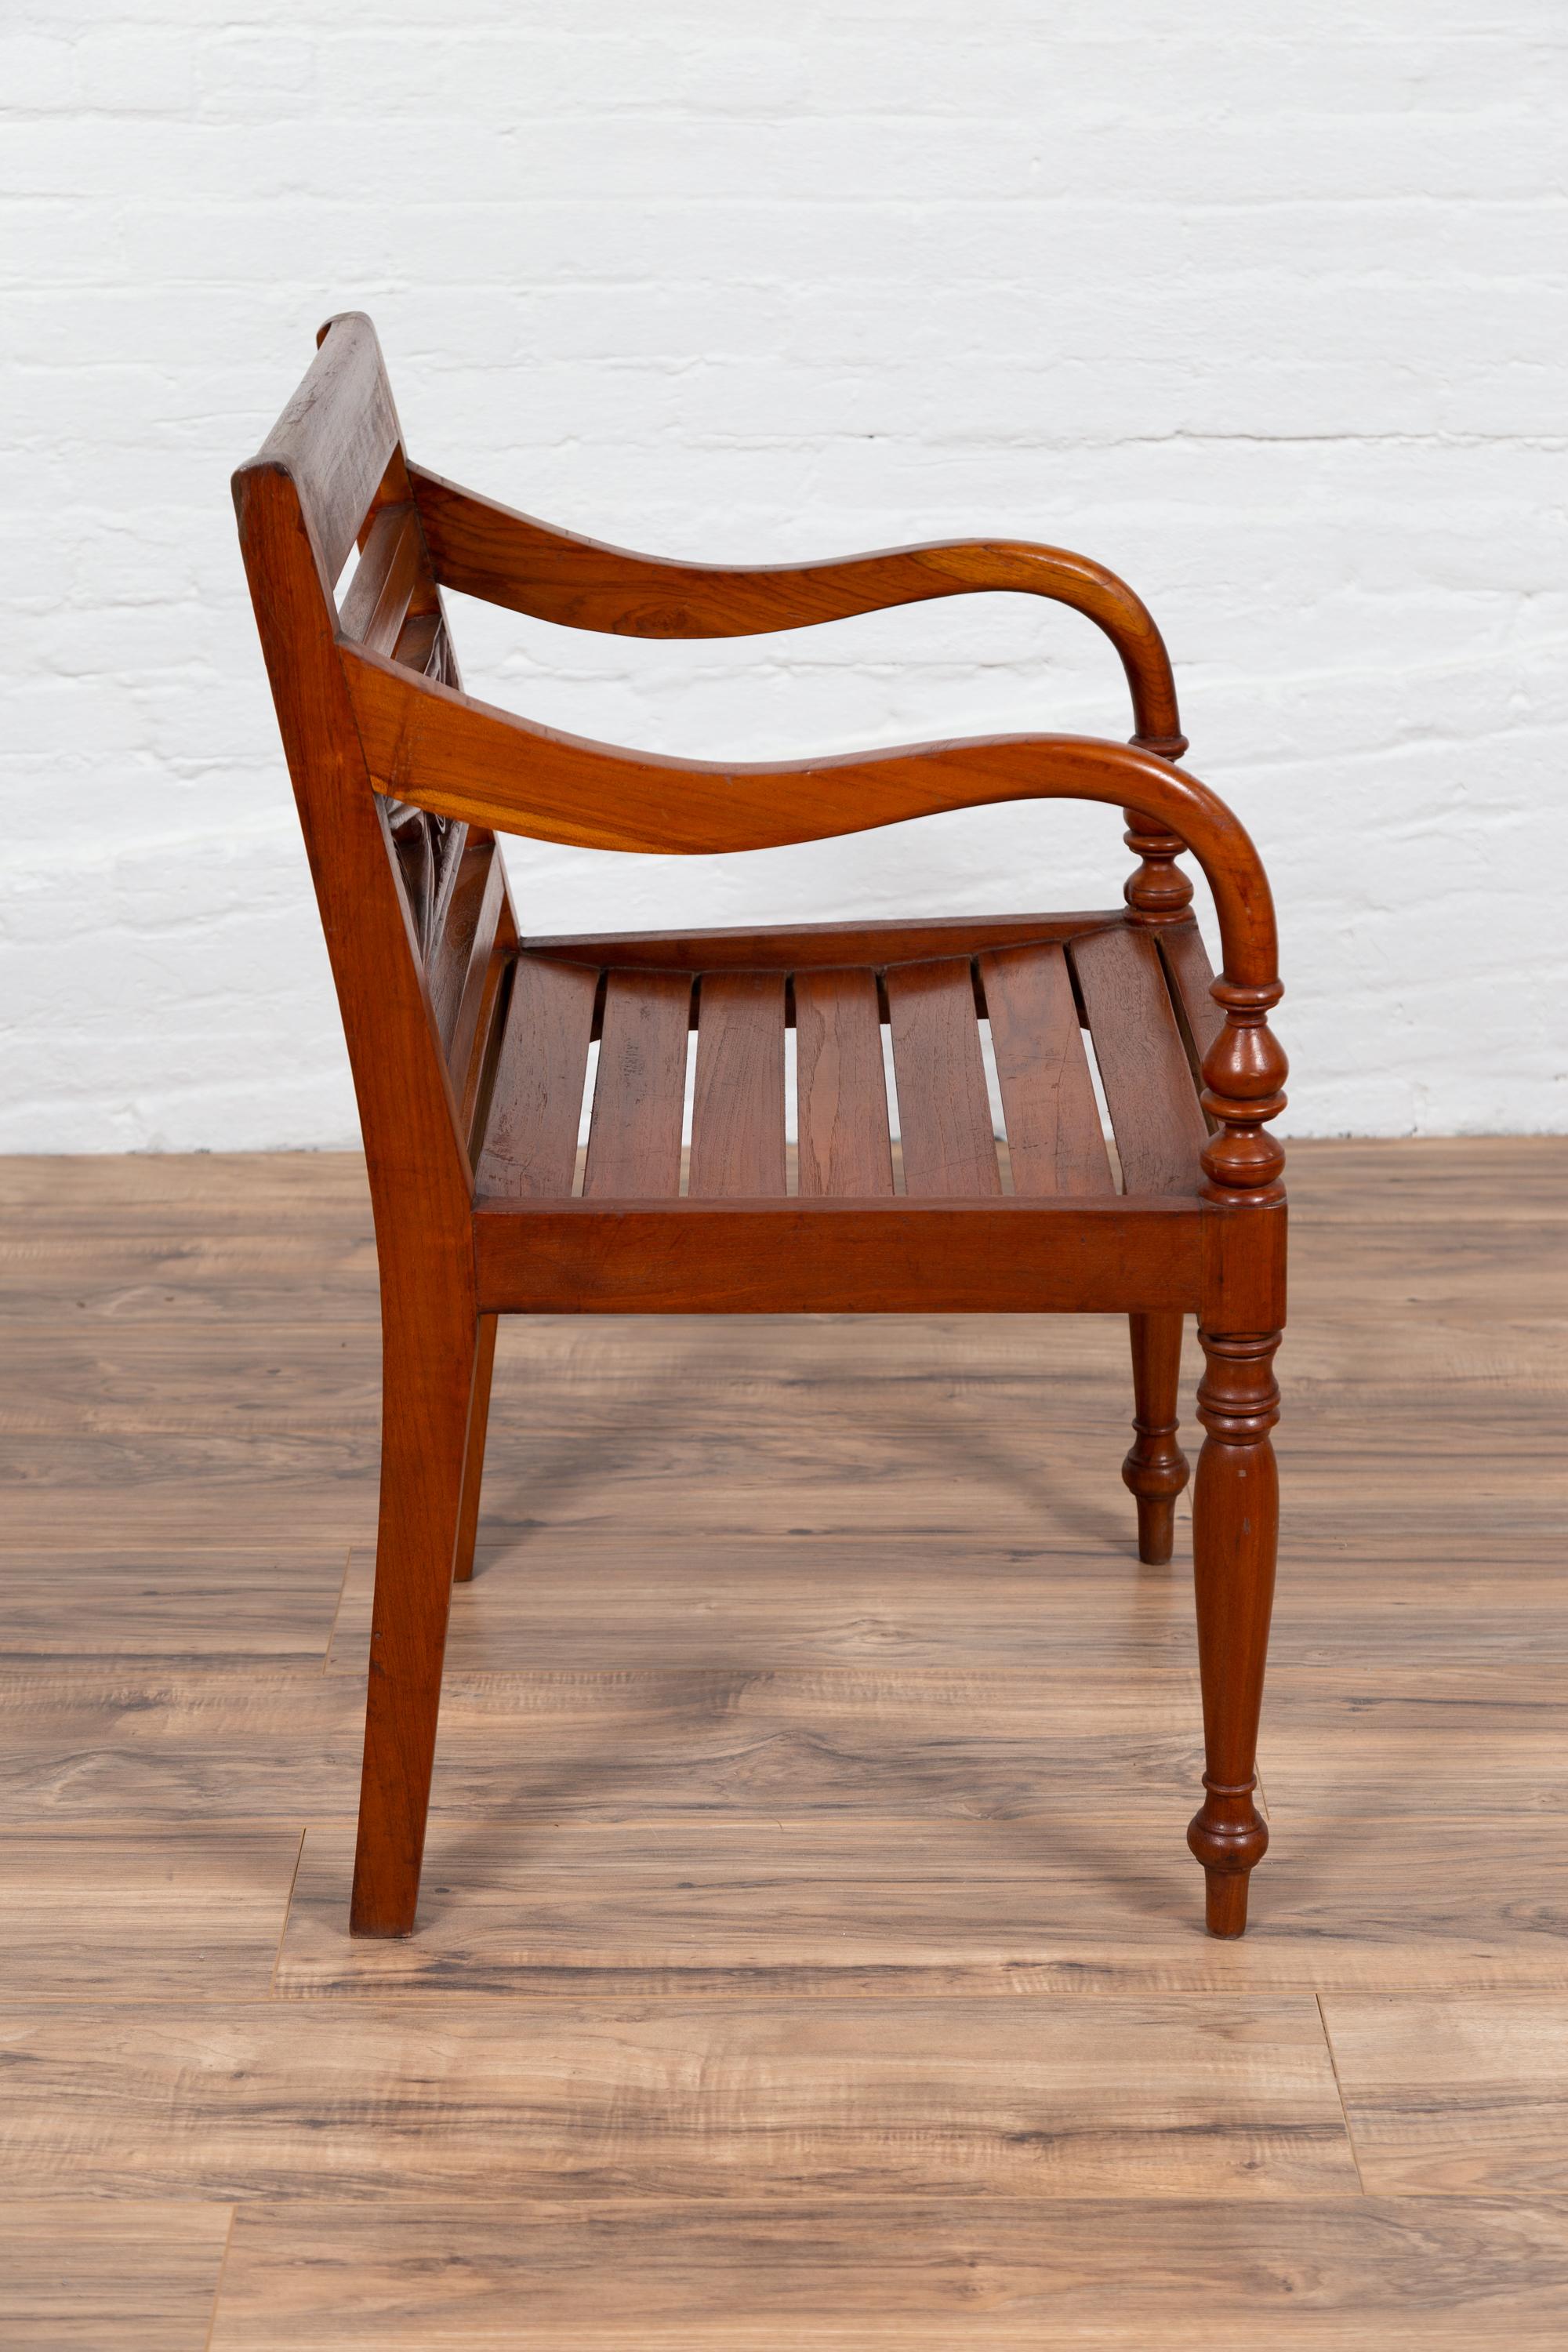 Early 20th Century Captain's Chair from Bali with Slatted Wood and Loop Arms For Sale 1